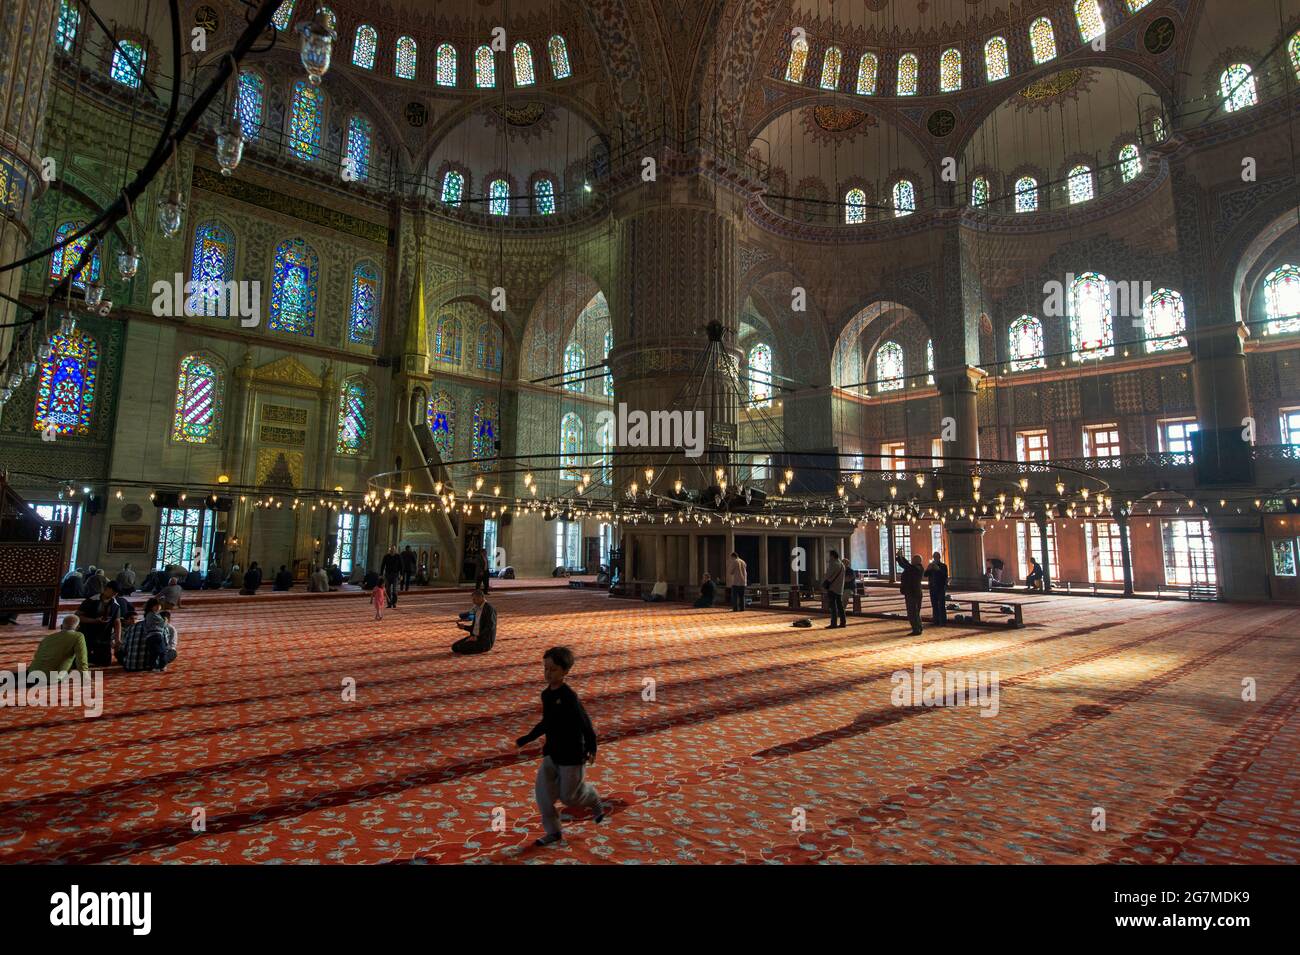 Sultan Ahmed Mosque, also known as the Blue Mosque, is an Ottoman-era mosque located in Istanbul, Turkey. A functioning mosque, it also attracts large Stock Photo